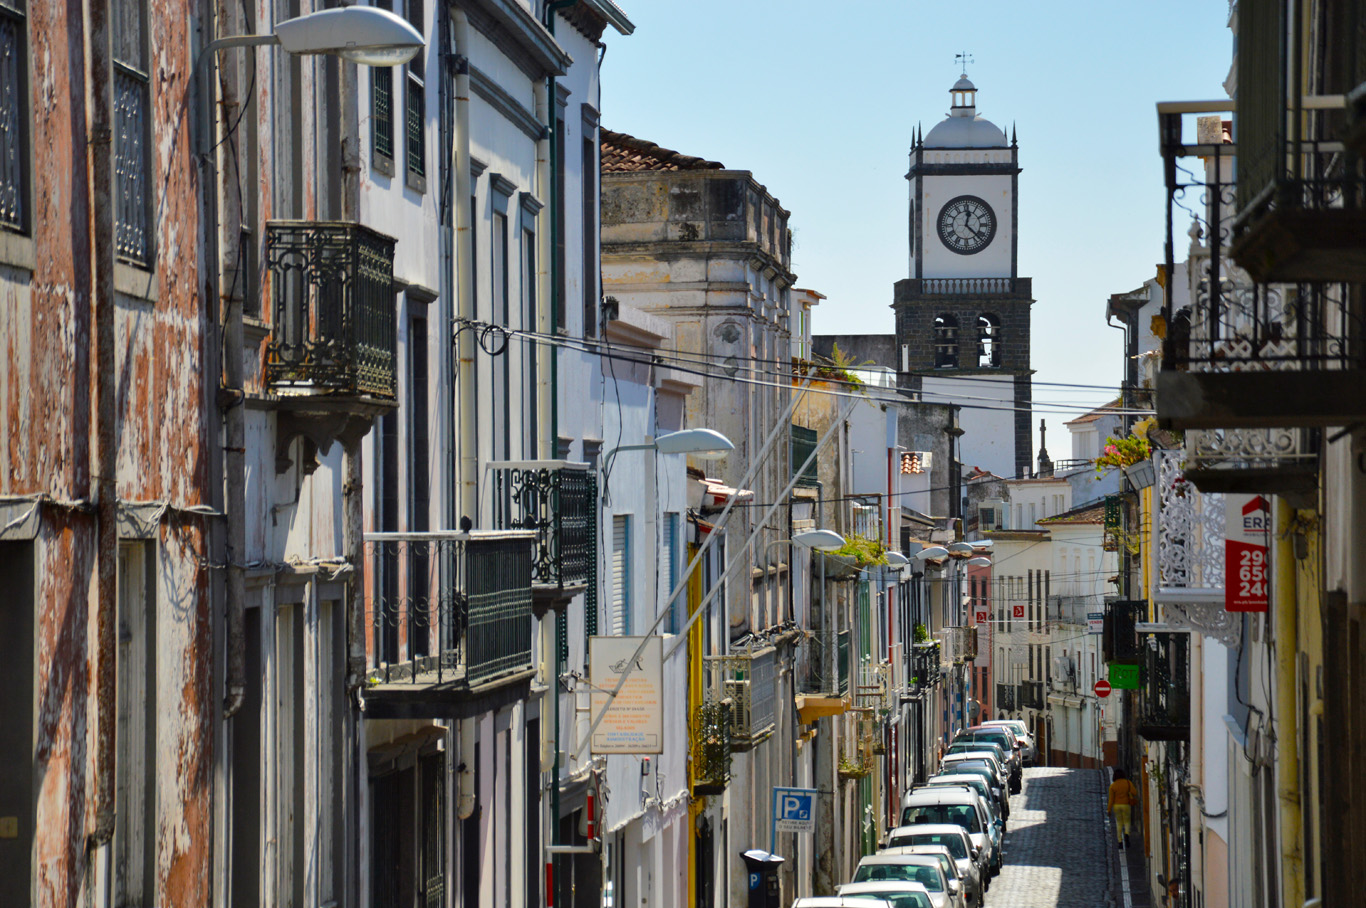 Ponta Delgada - the clock tower seen in the distance